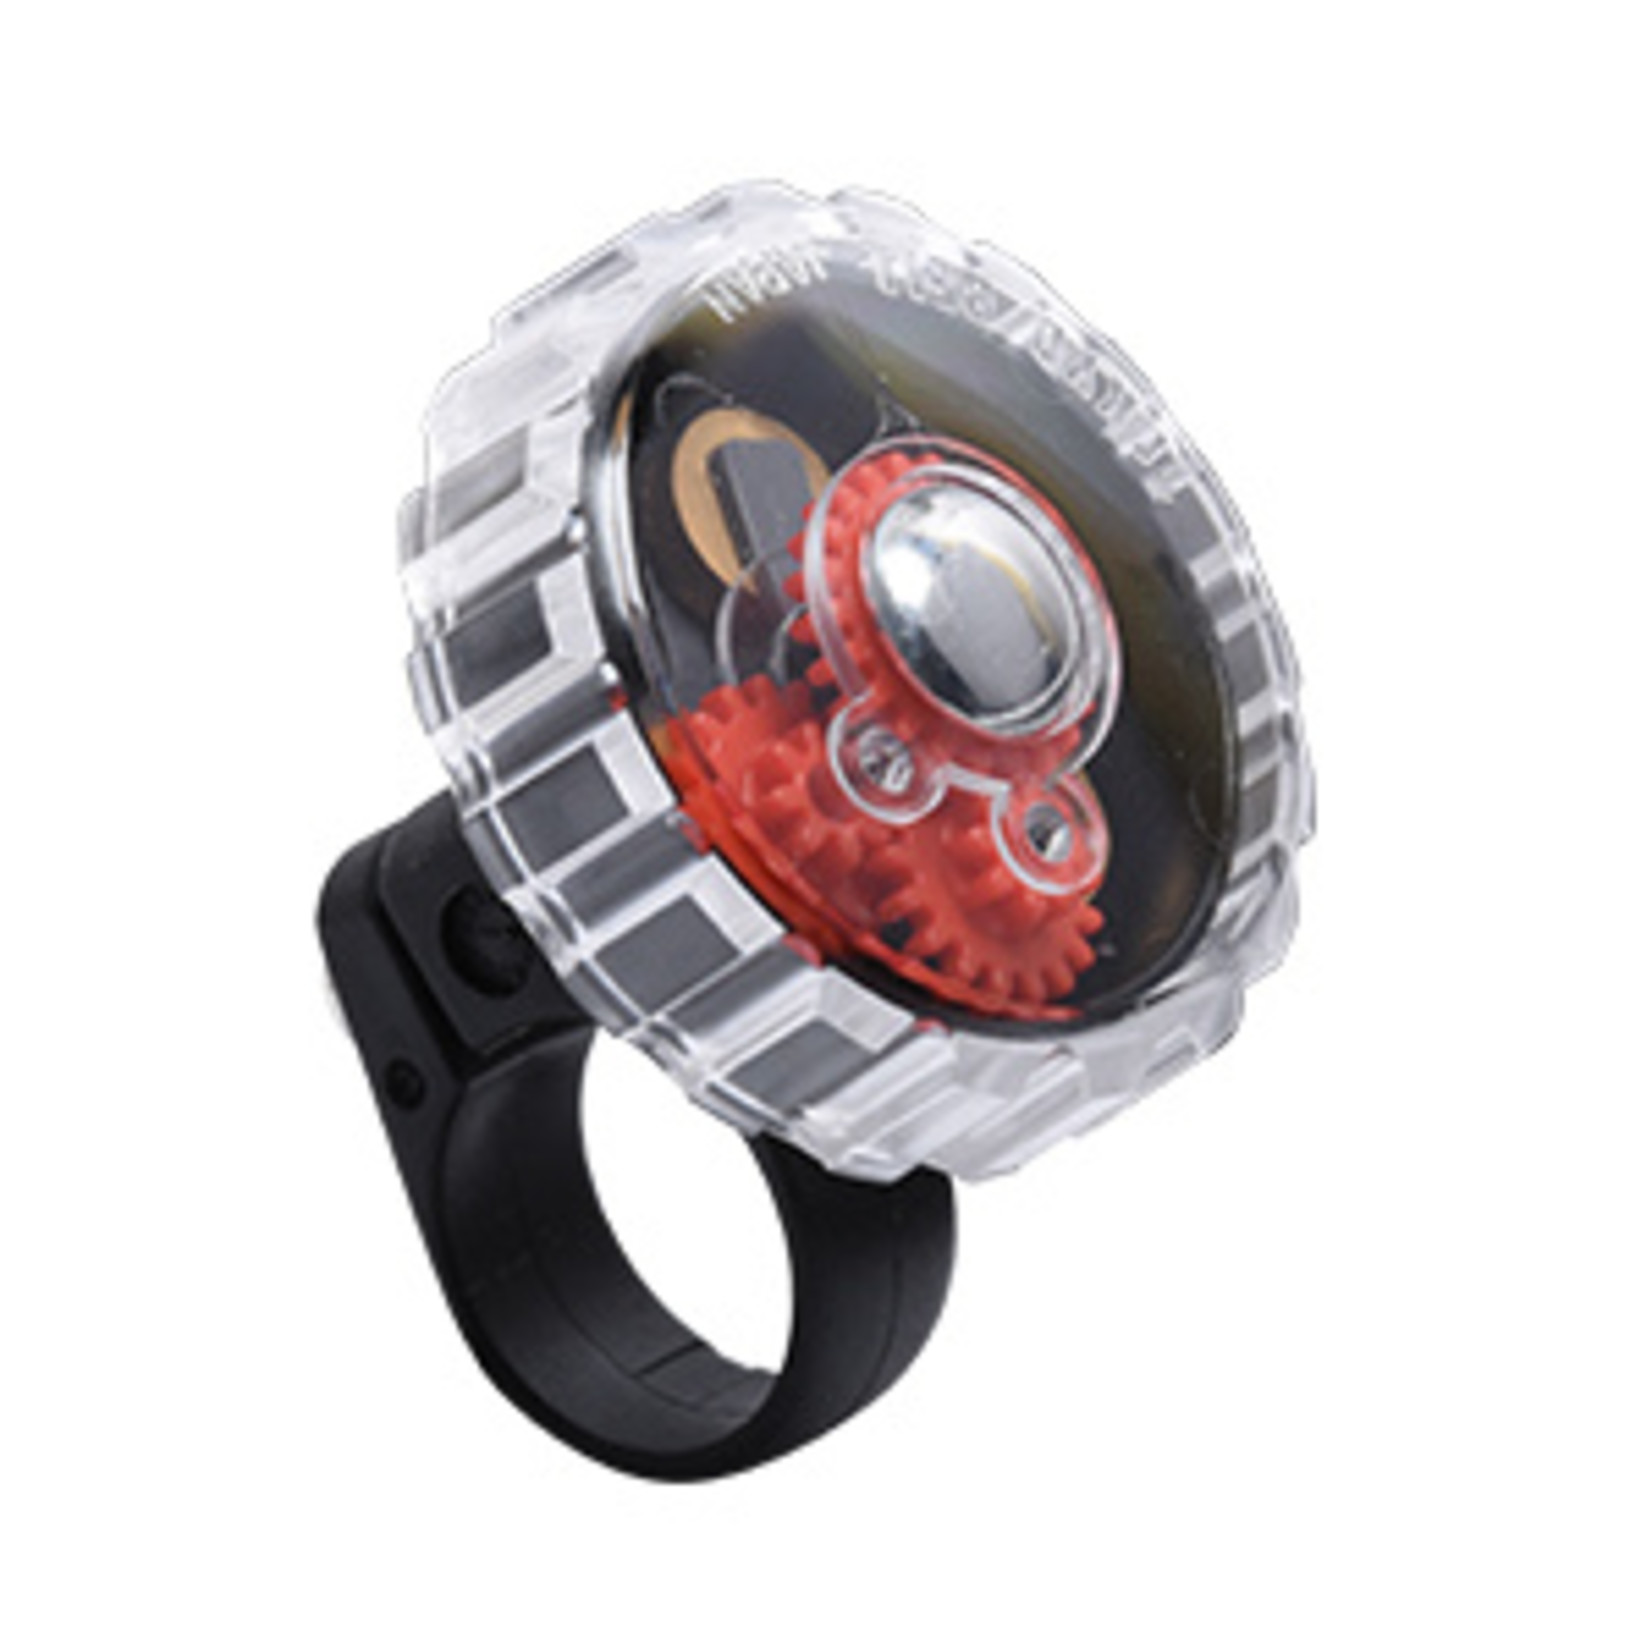 MIRRYCLE INCREDIBELL GEAR BICYCLE BELL